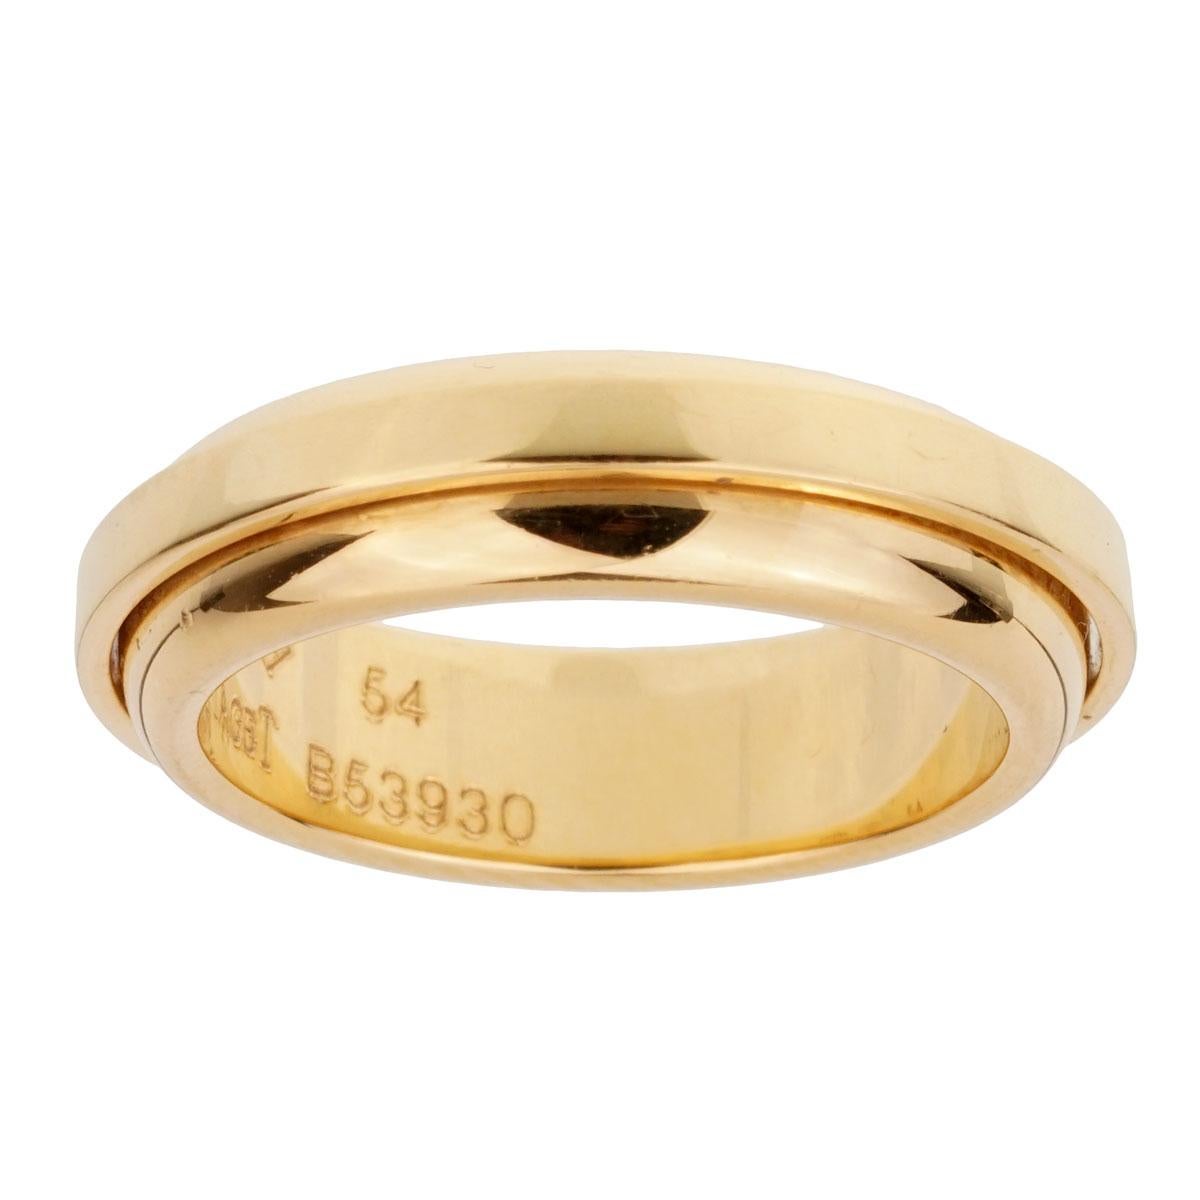 A fabulous Piaget Possession band style ring featuring highly polished 18k yellow gold bands layered together. The ring measures a size 6 1/2

Sku: 1927